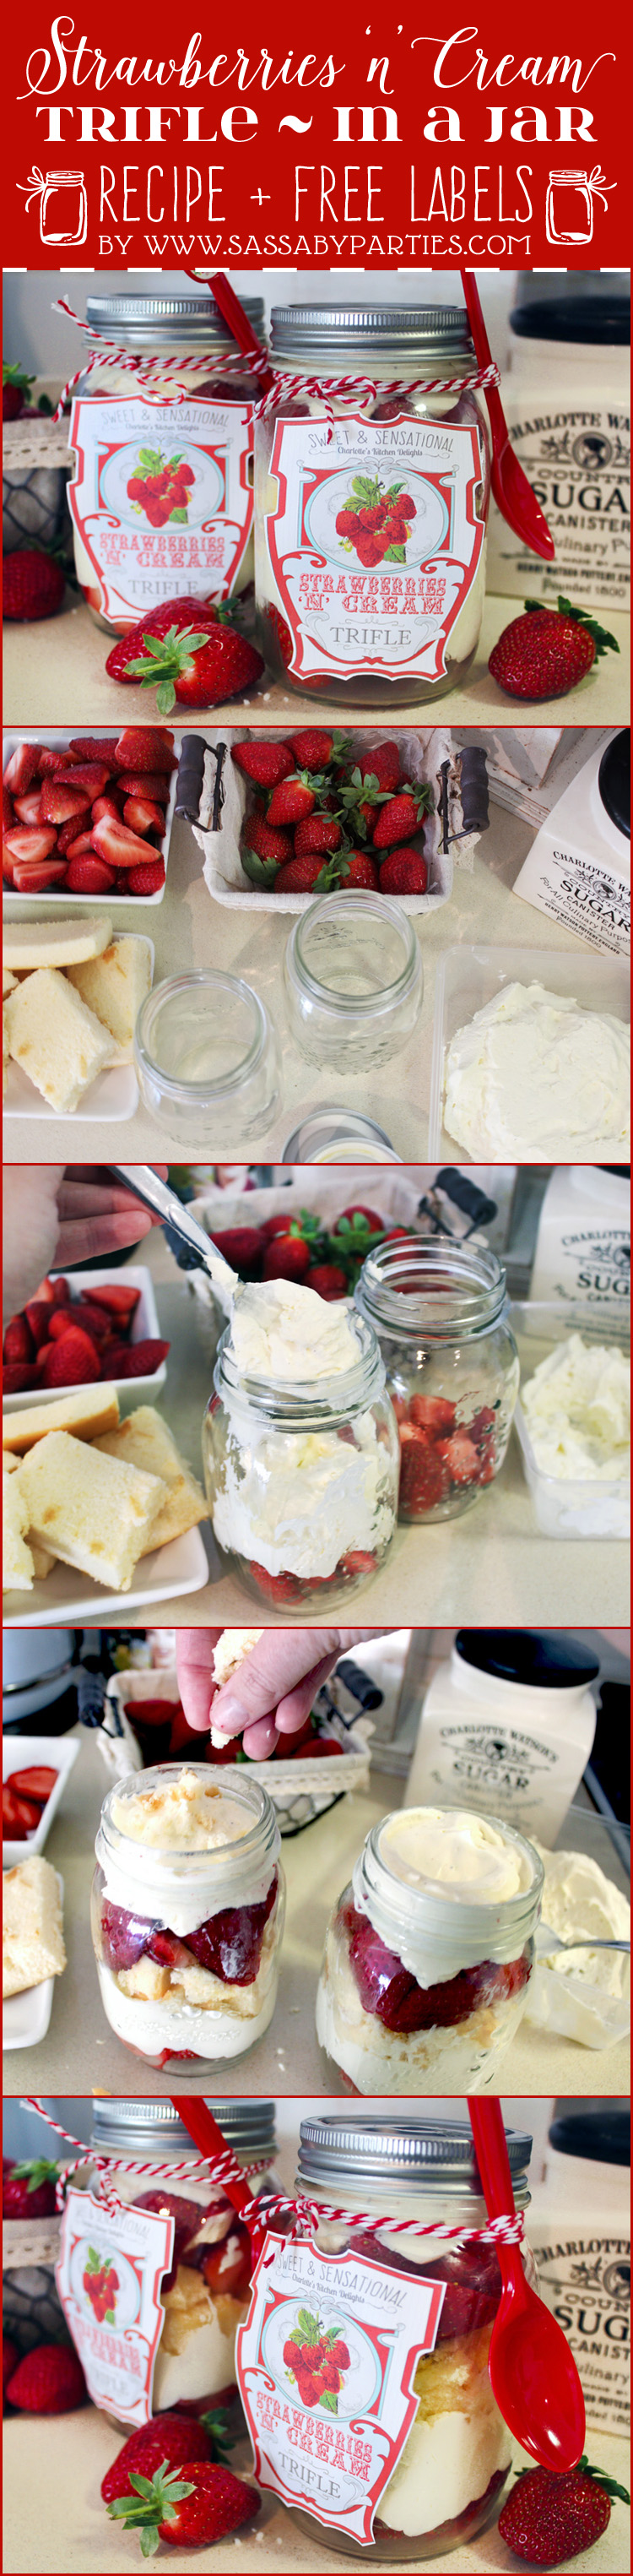 Strawberries n Cream Trifle Recipe + Free Labels by SassabyParties.com